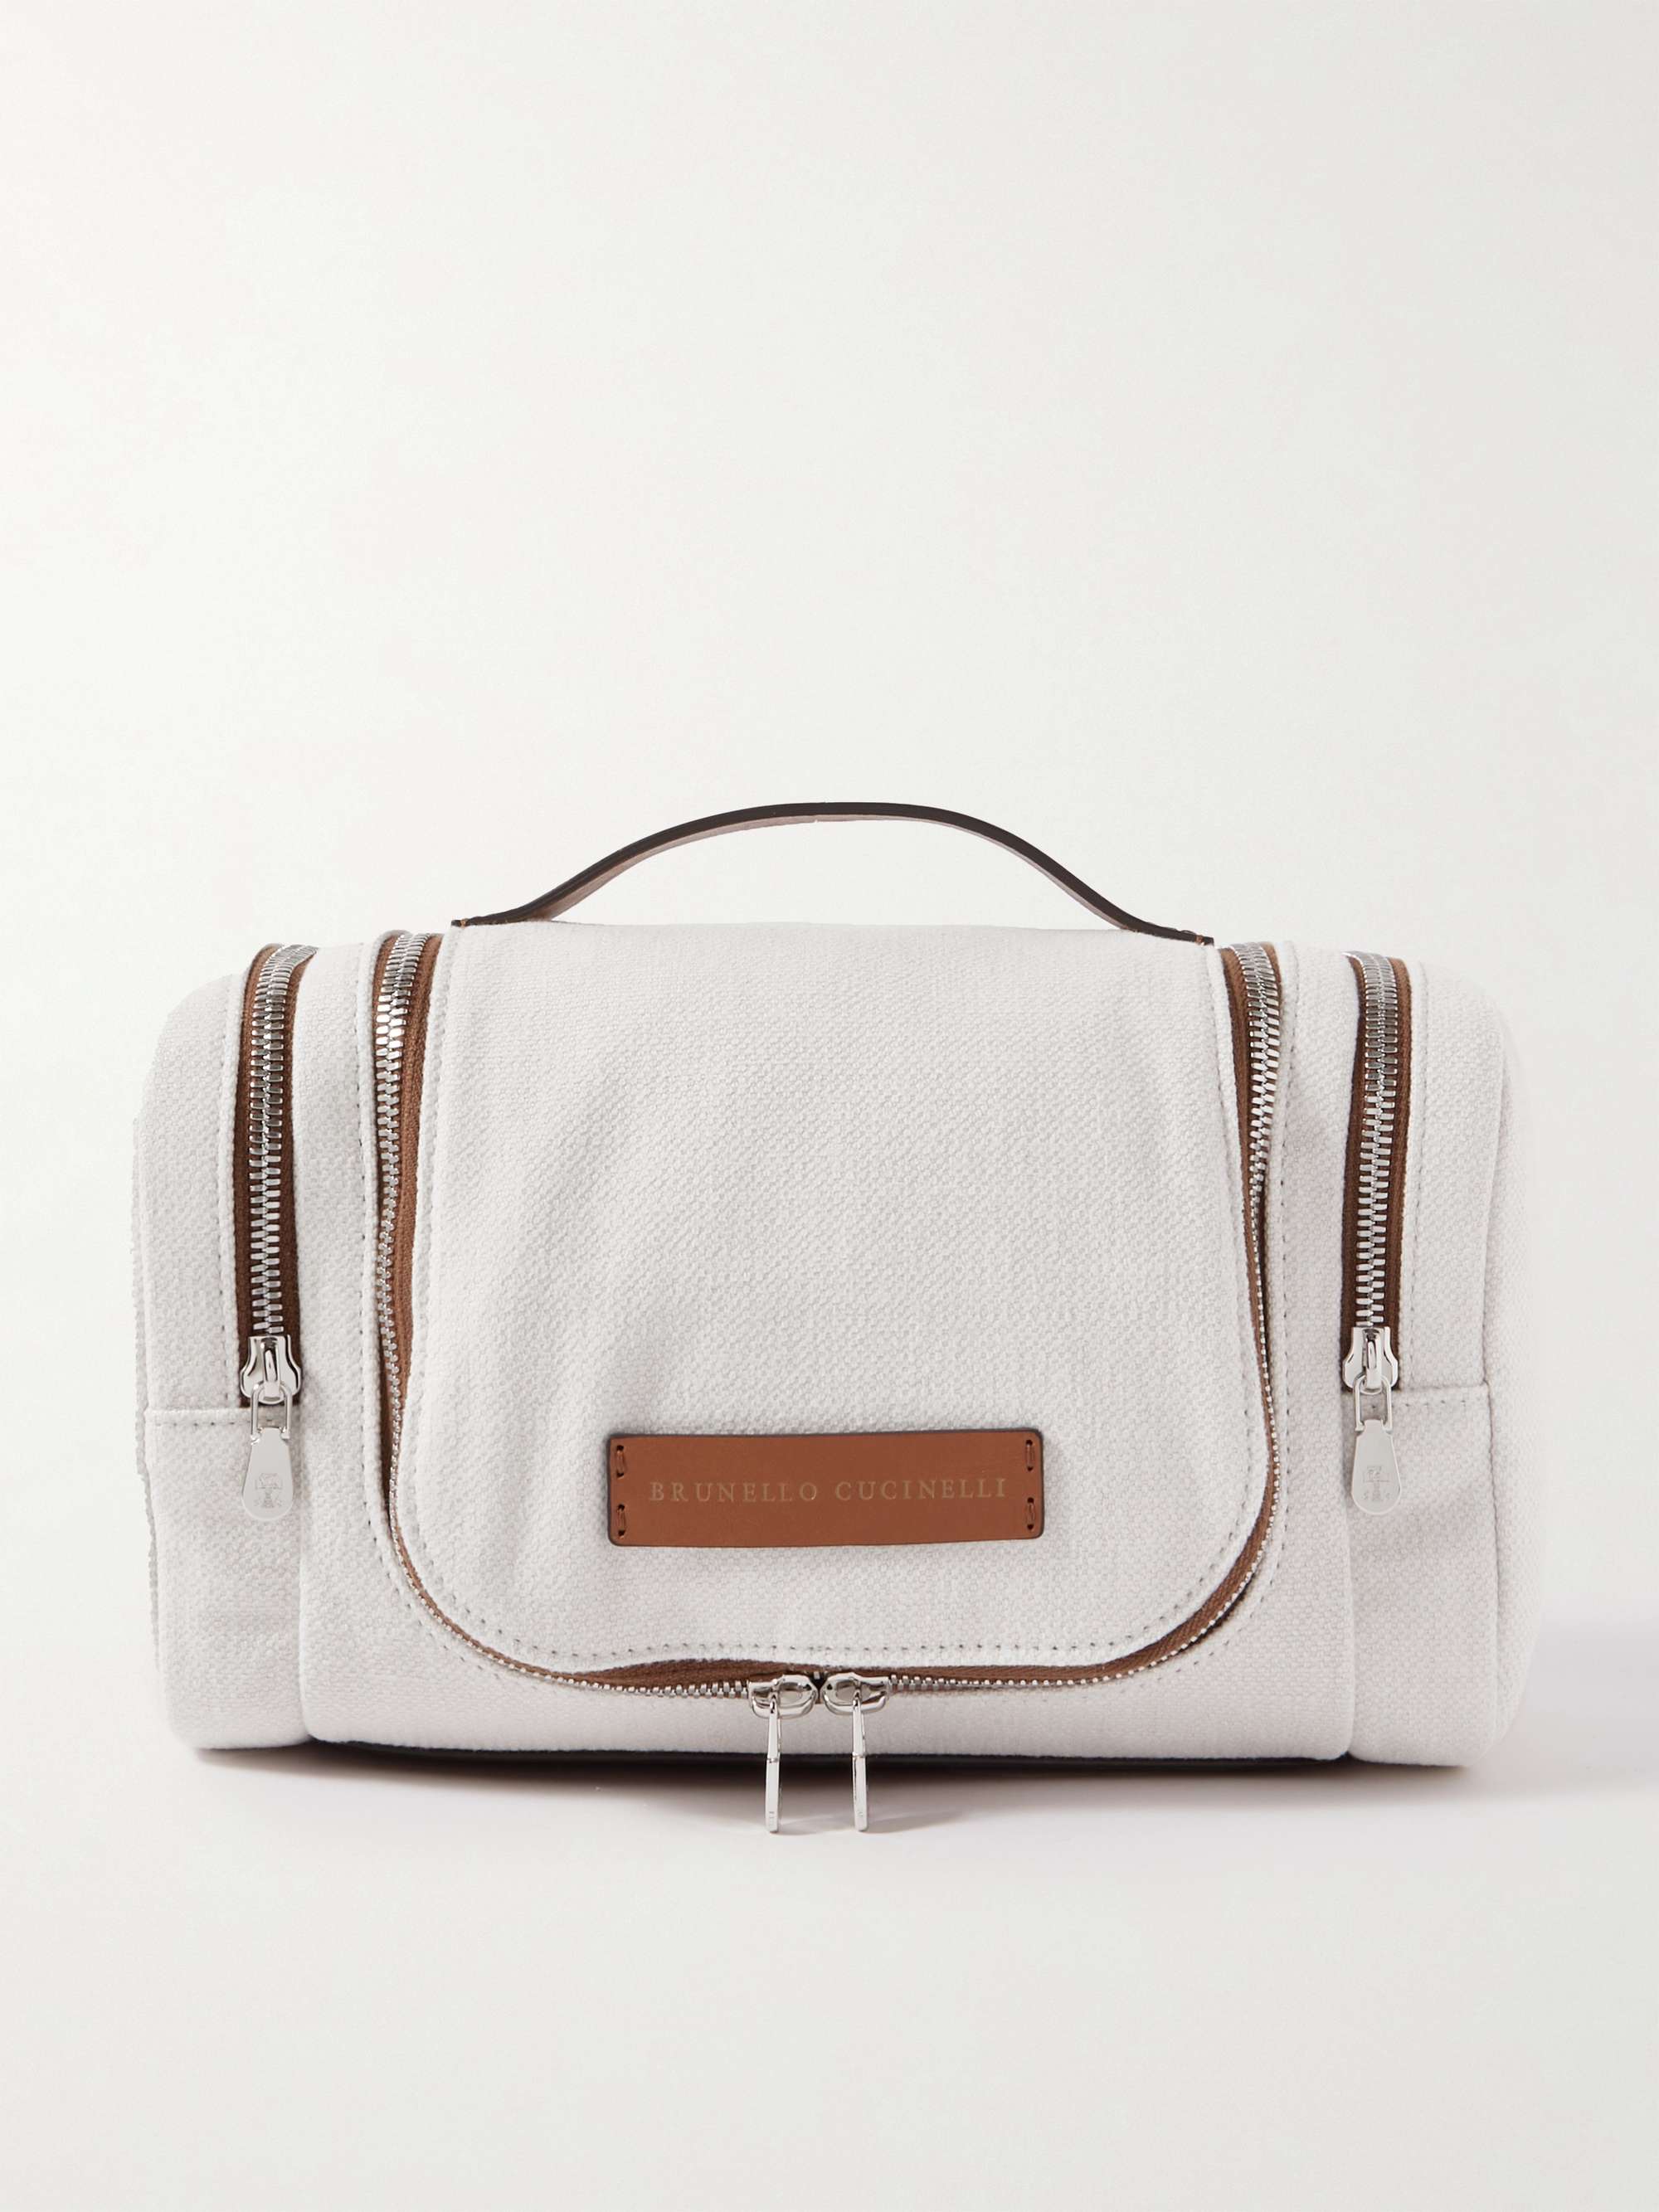 BRUNELLO CUCINELLI Leather-Trimmed Cotton and Linen-Blend Canvas Weekend Bag